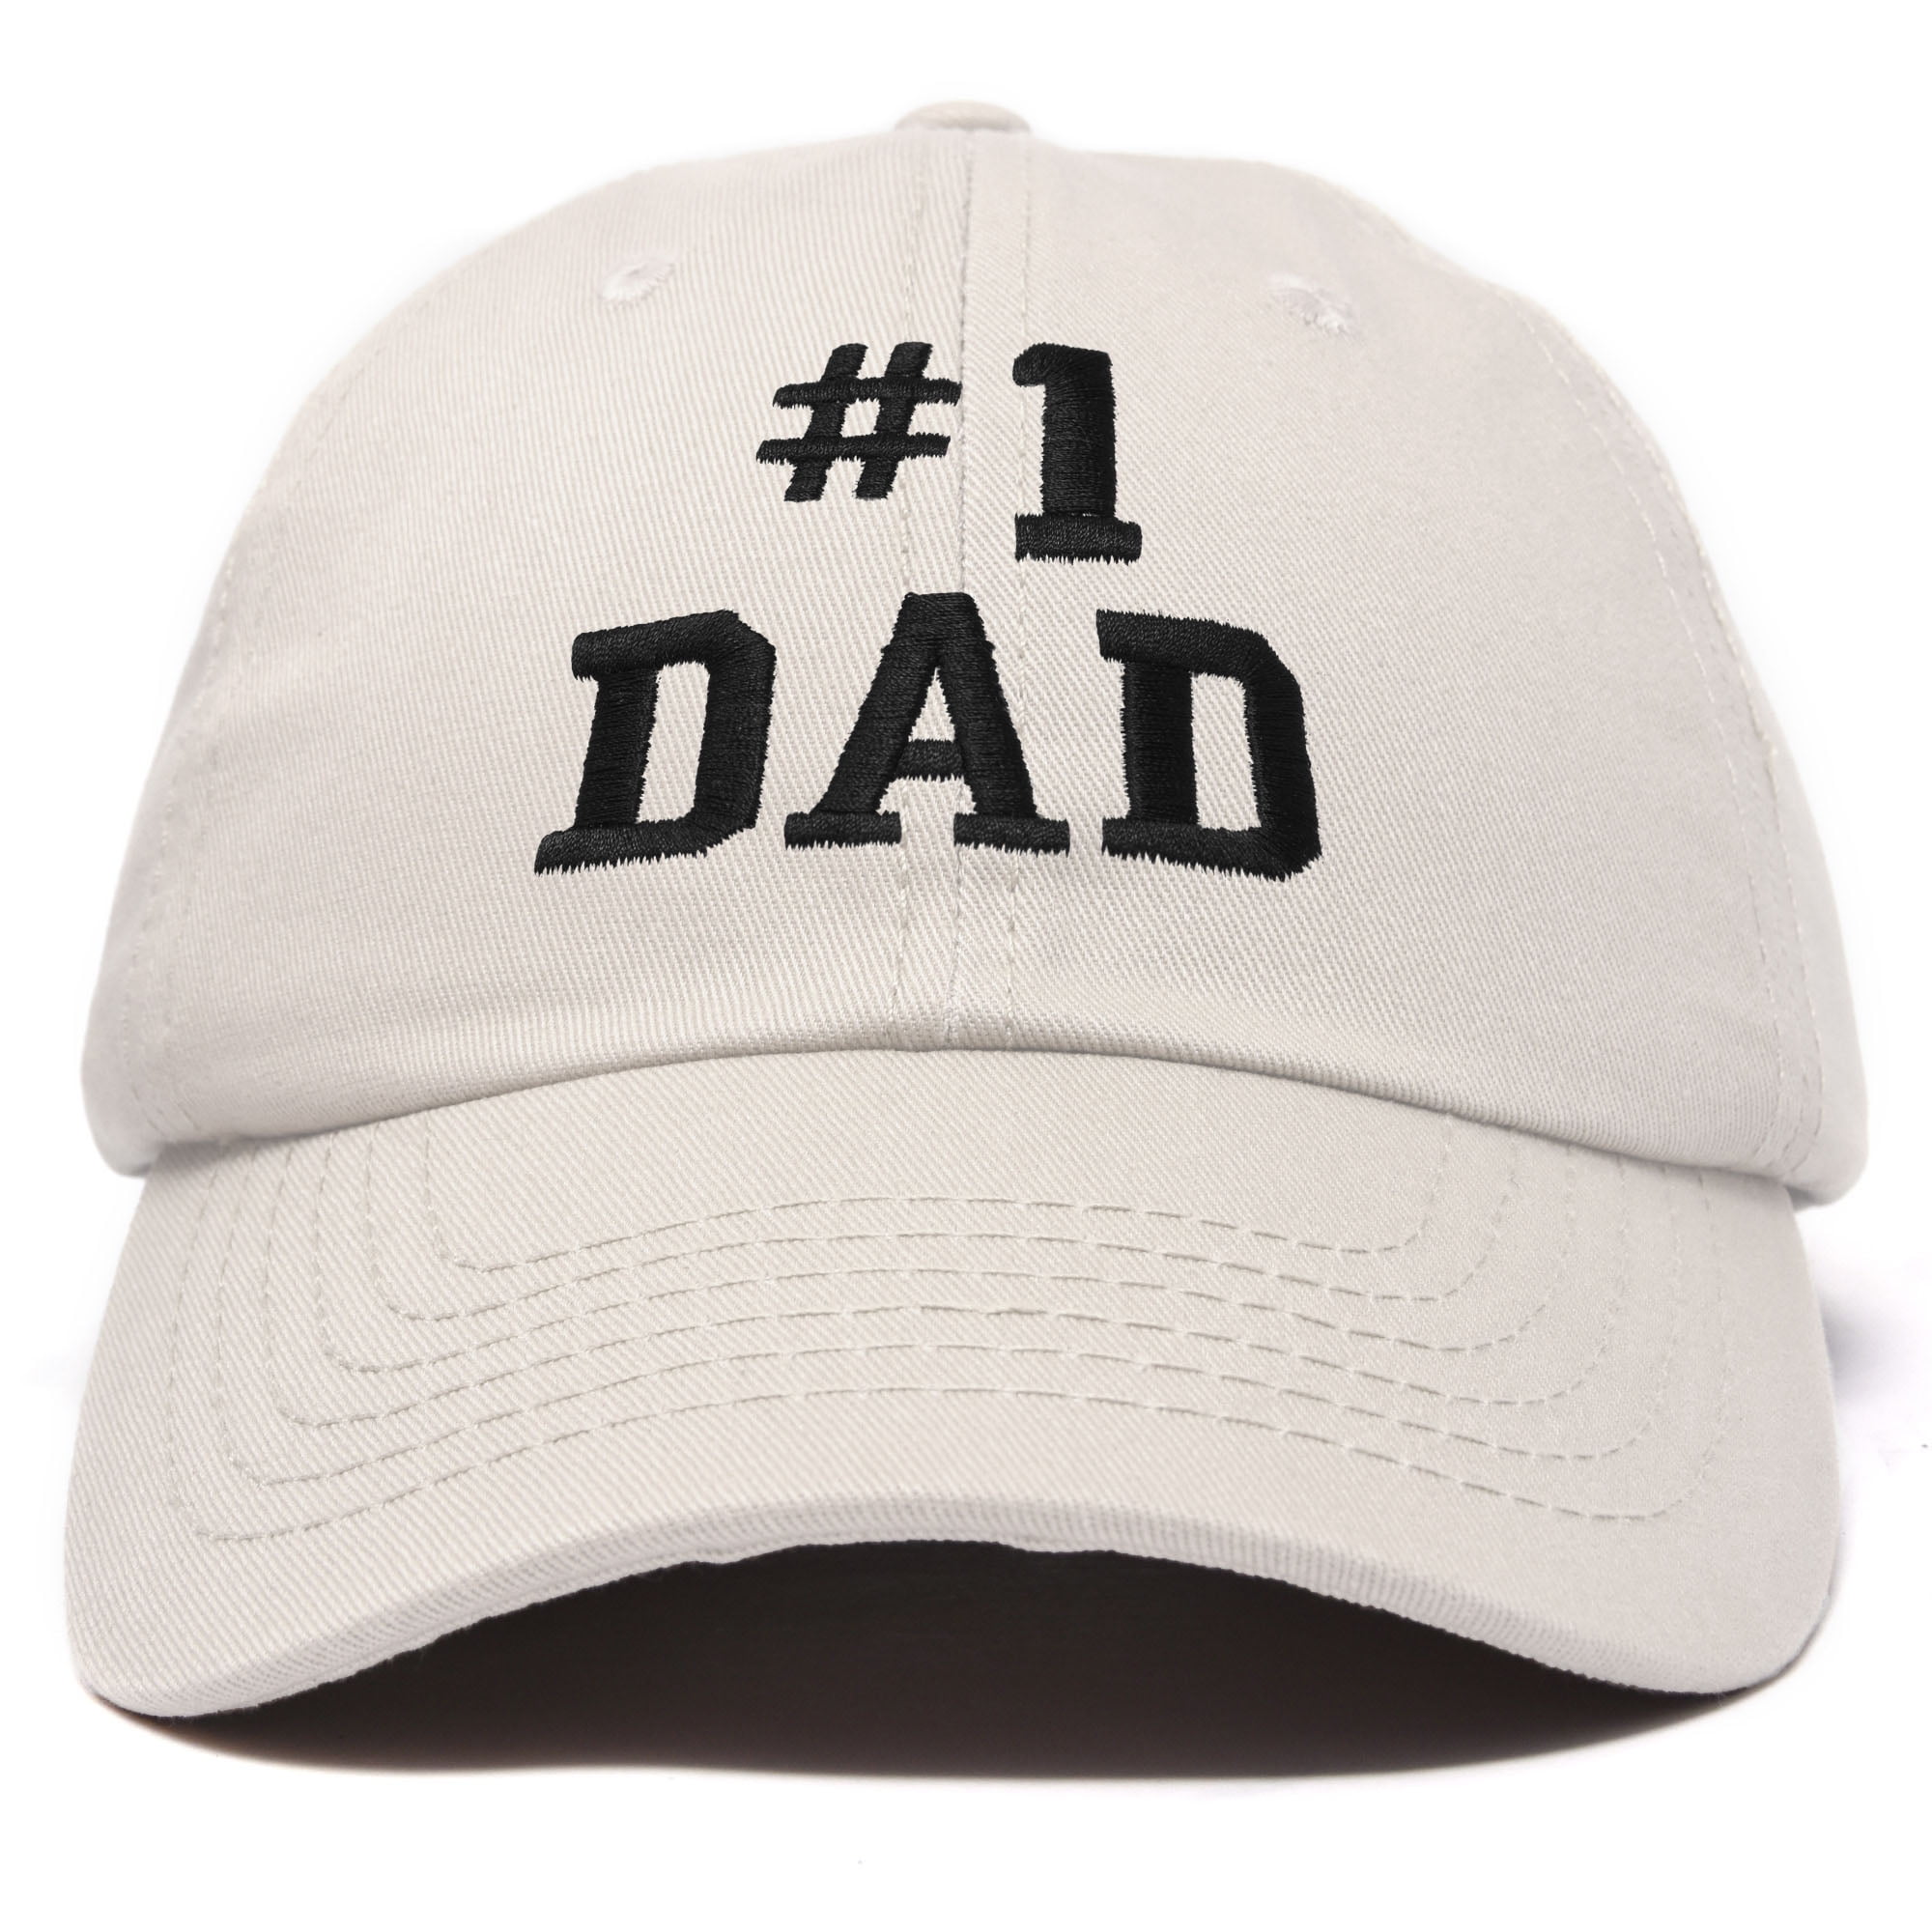 Custom Snapback Hats for Men & Women Number #1 PAPA Embroidery Cotton Snapback